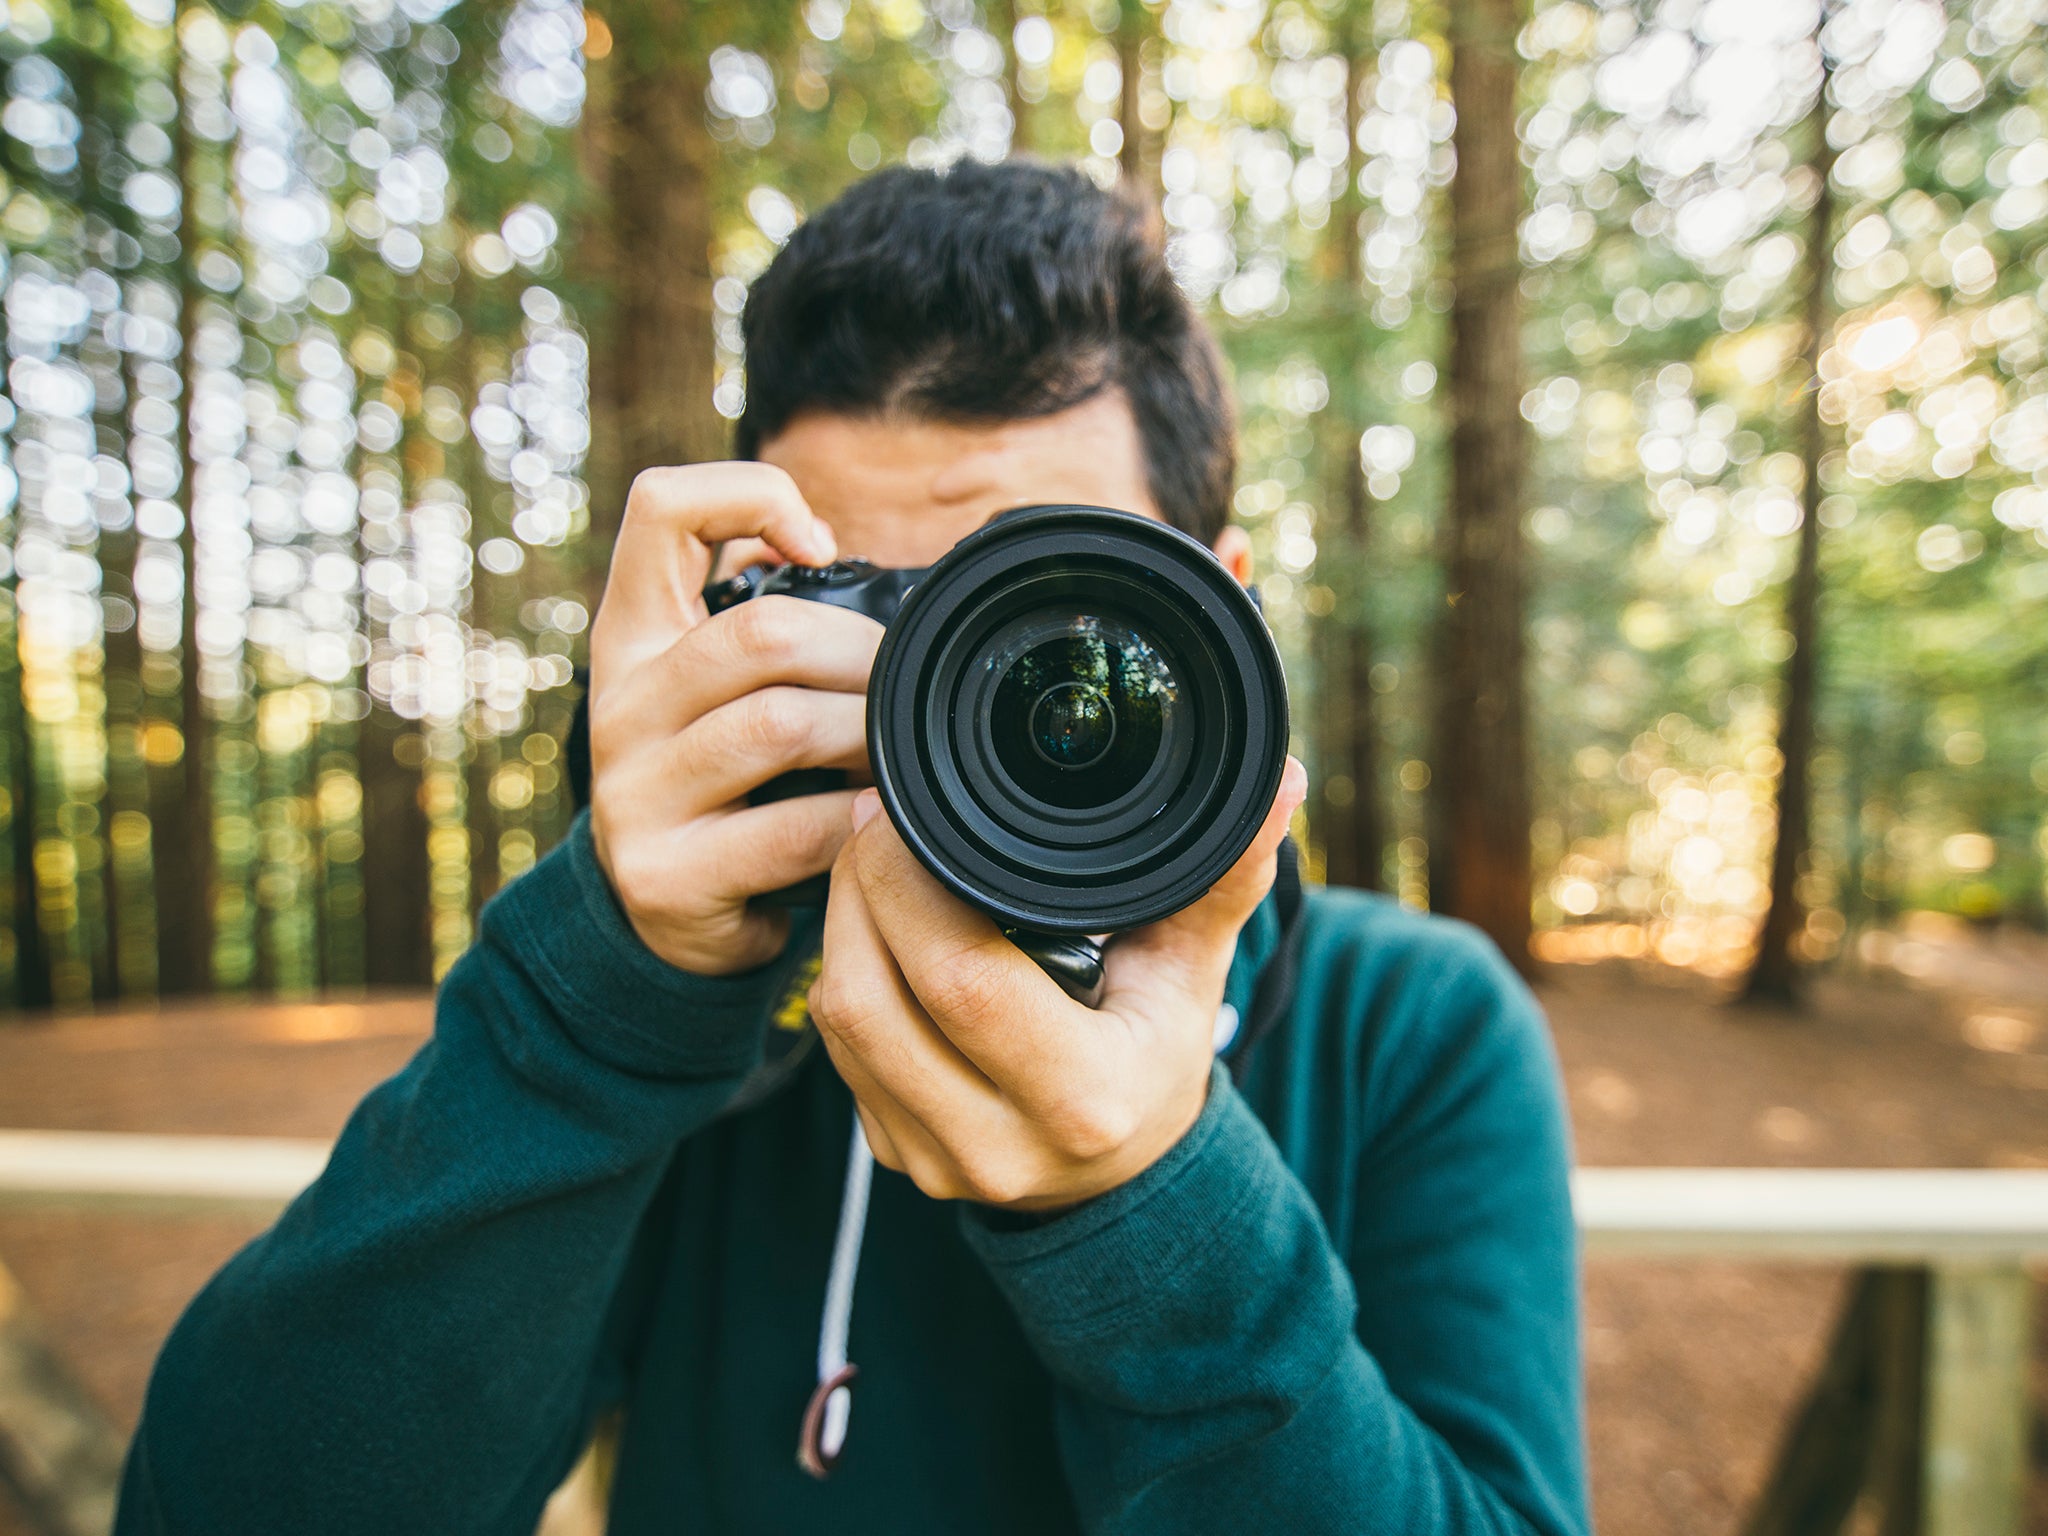 If you enjoy photography, why not use your hobby to make money?